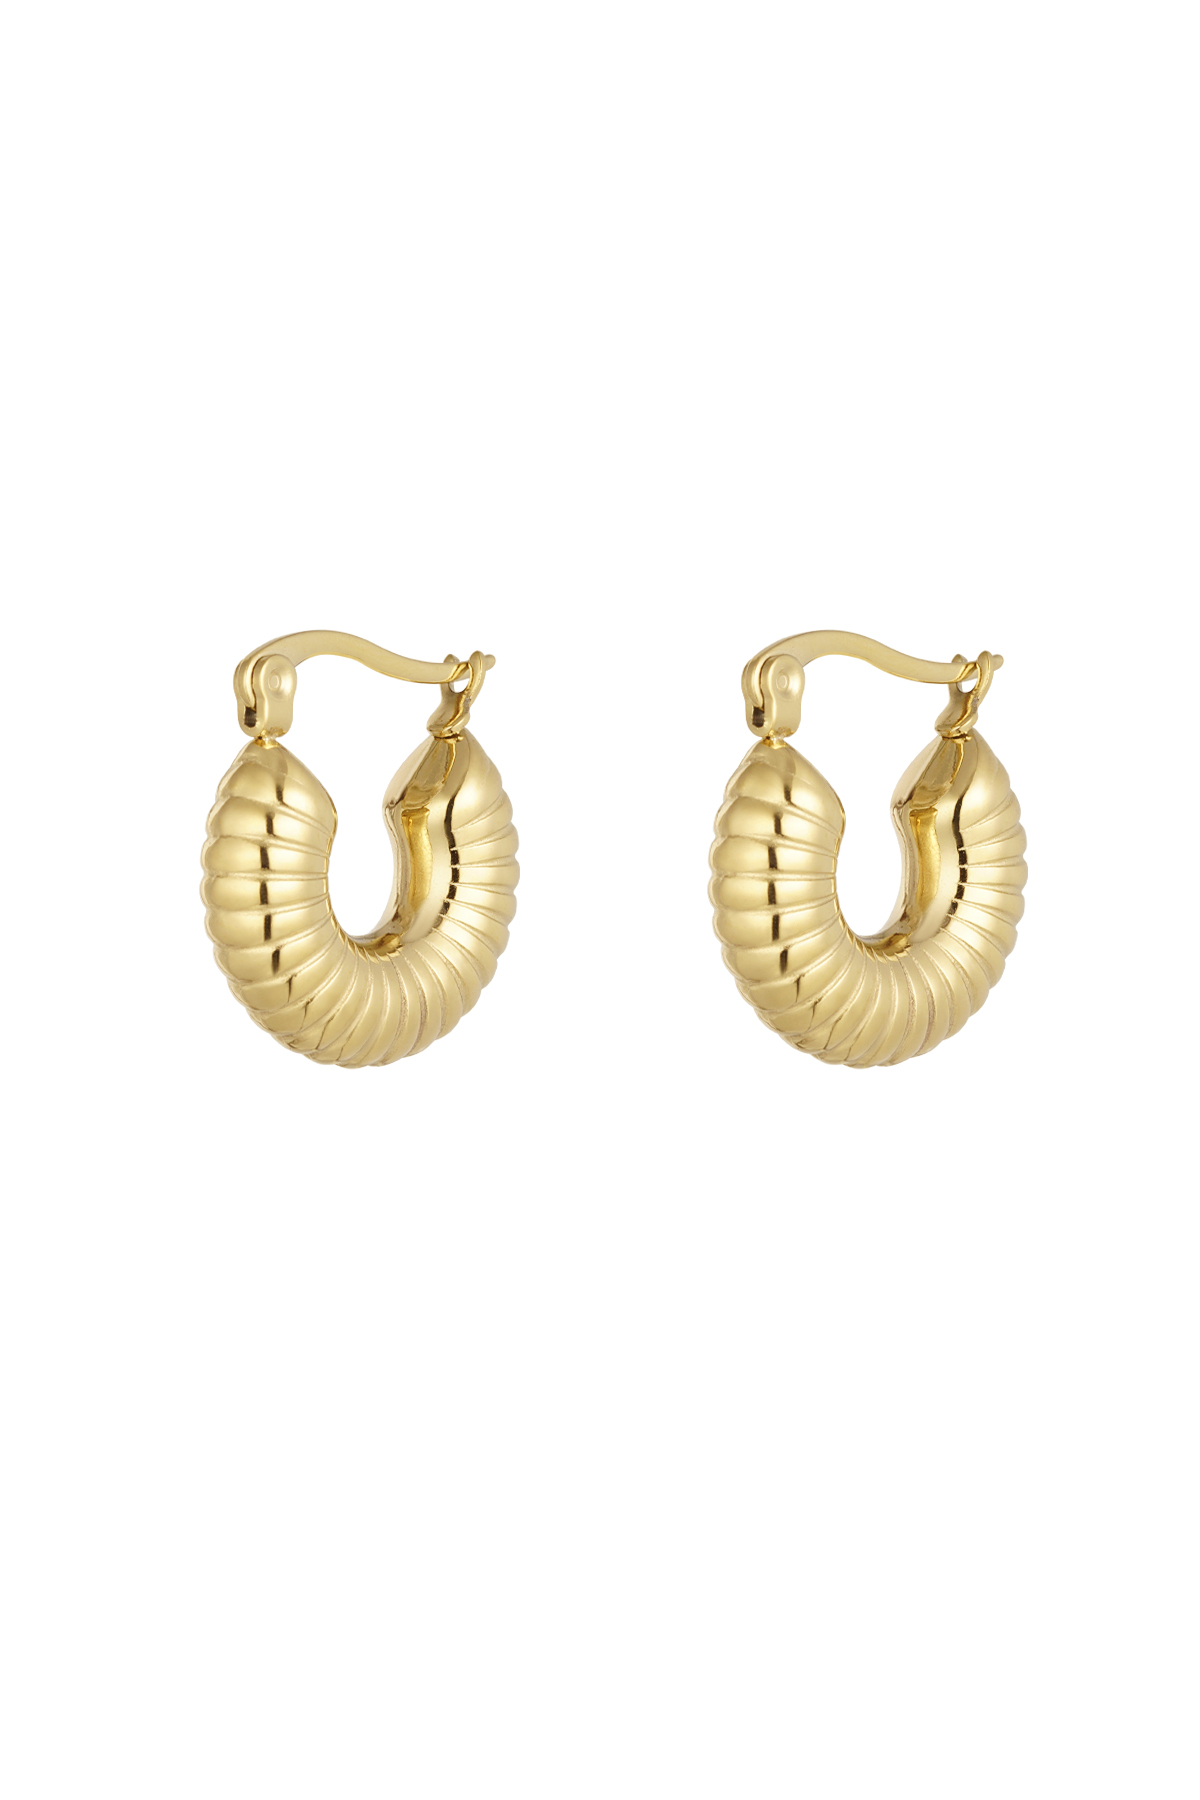 Earrings aesthetic round small - gold h5 